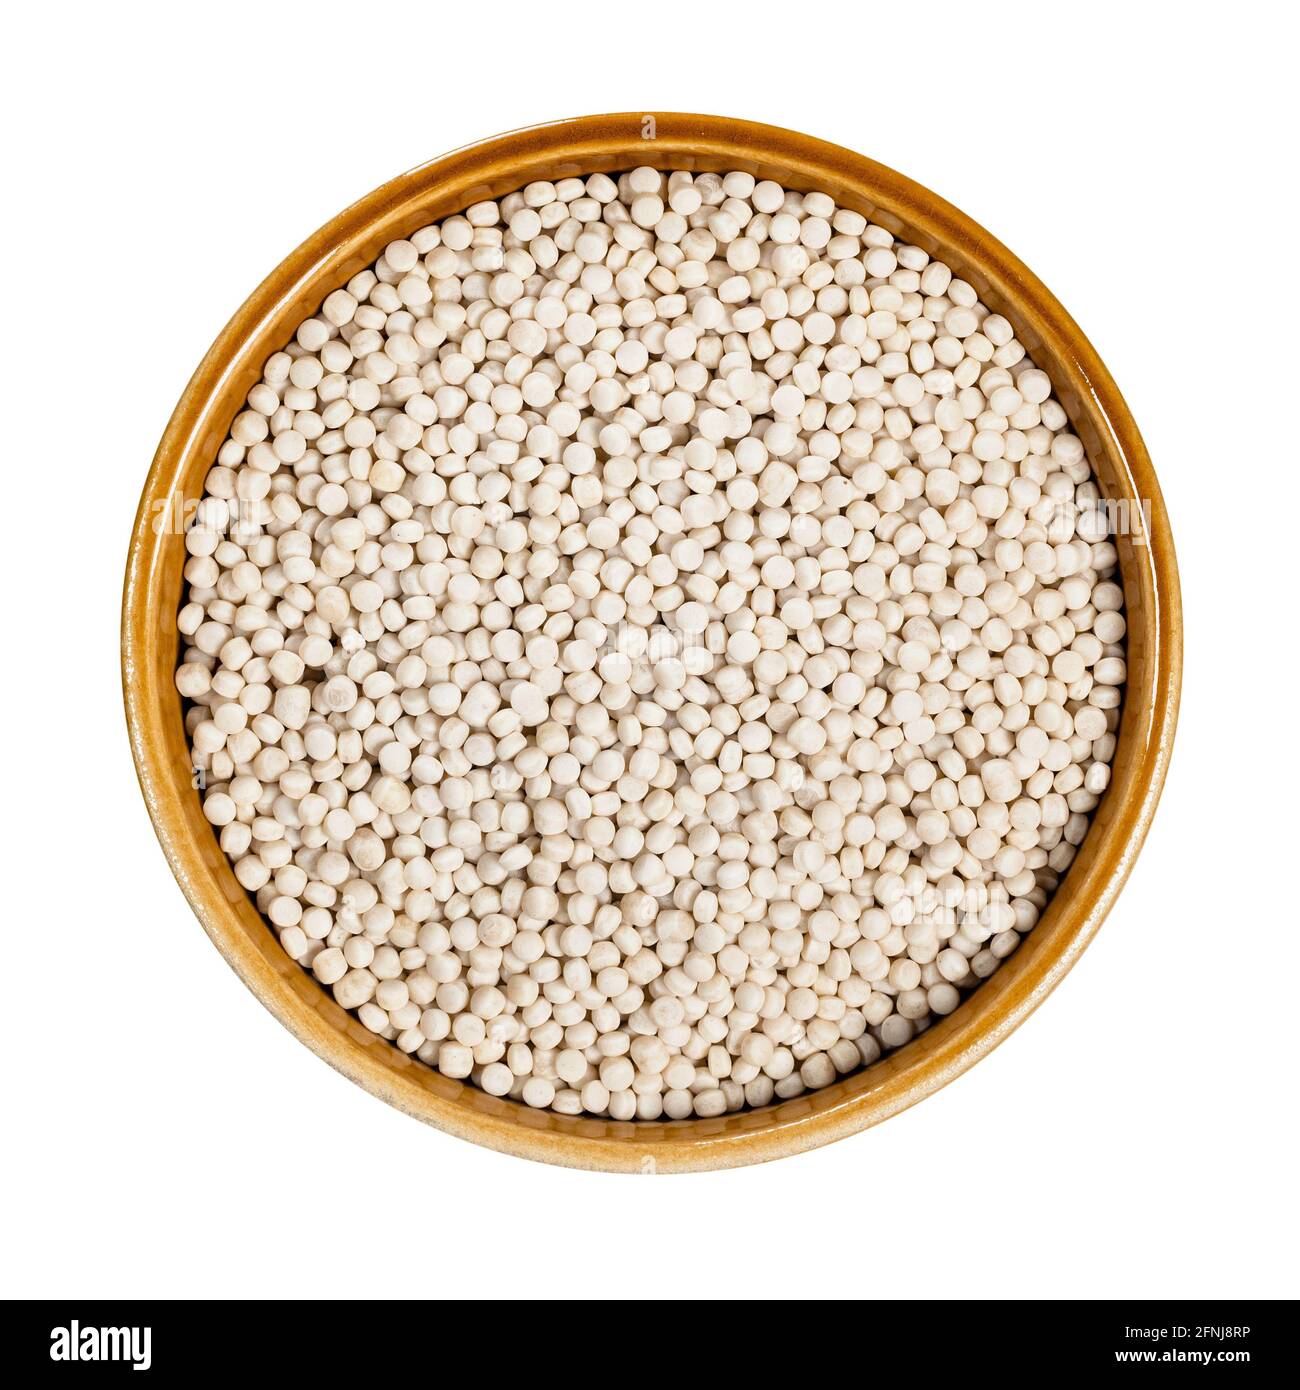 top view of uncooked ptitim (pearl couscous) in round ceramic bowl cutout on white background Stock Photo